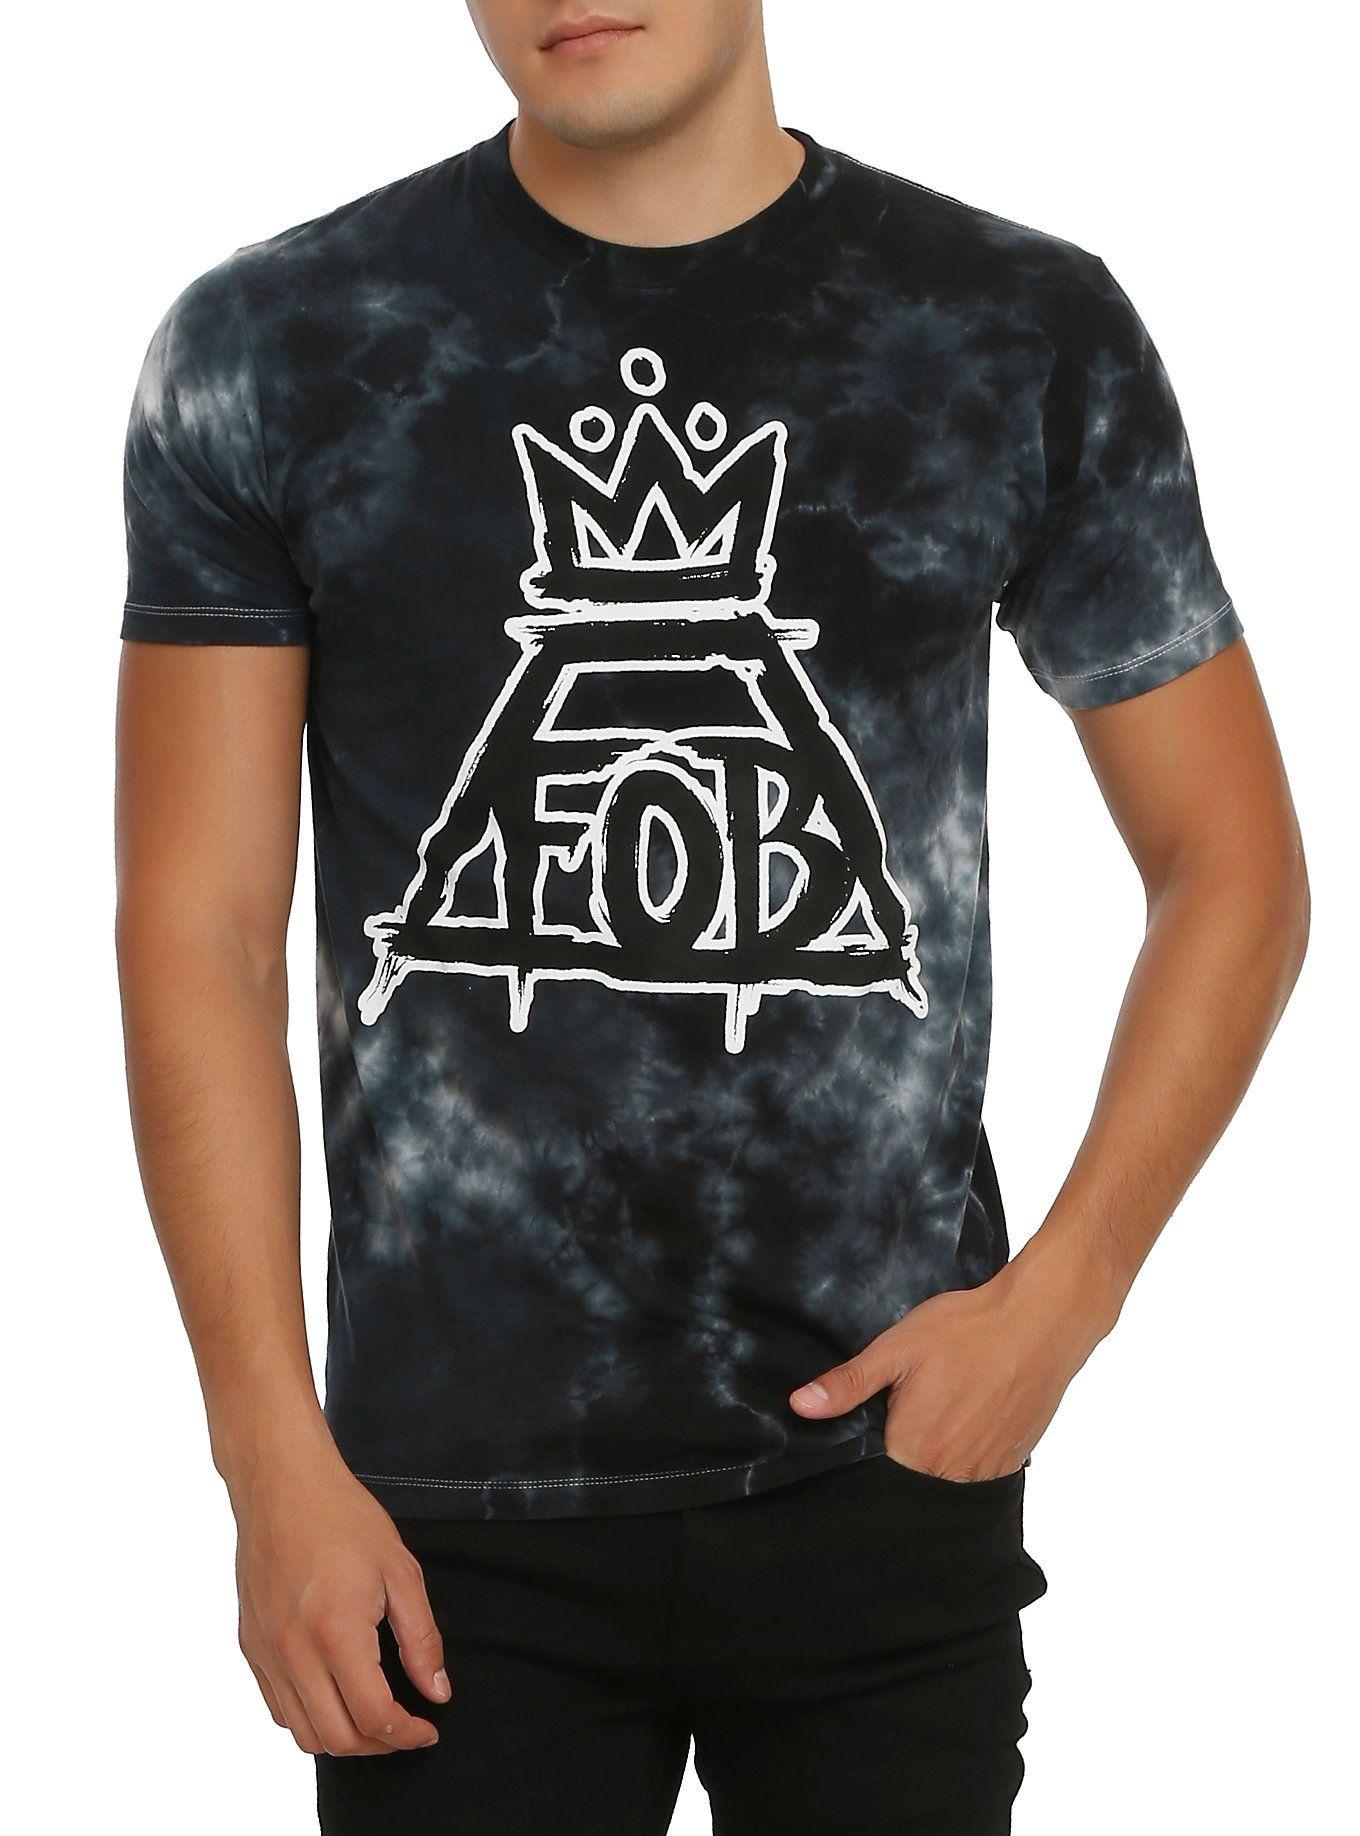 FOB Crown Logo - Tie dye T-shirt from Fall Out Boy with 